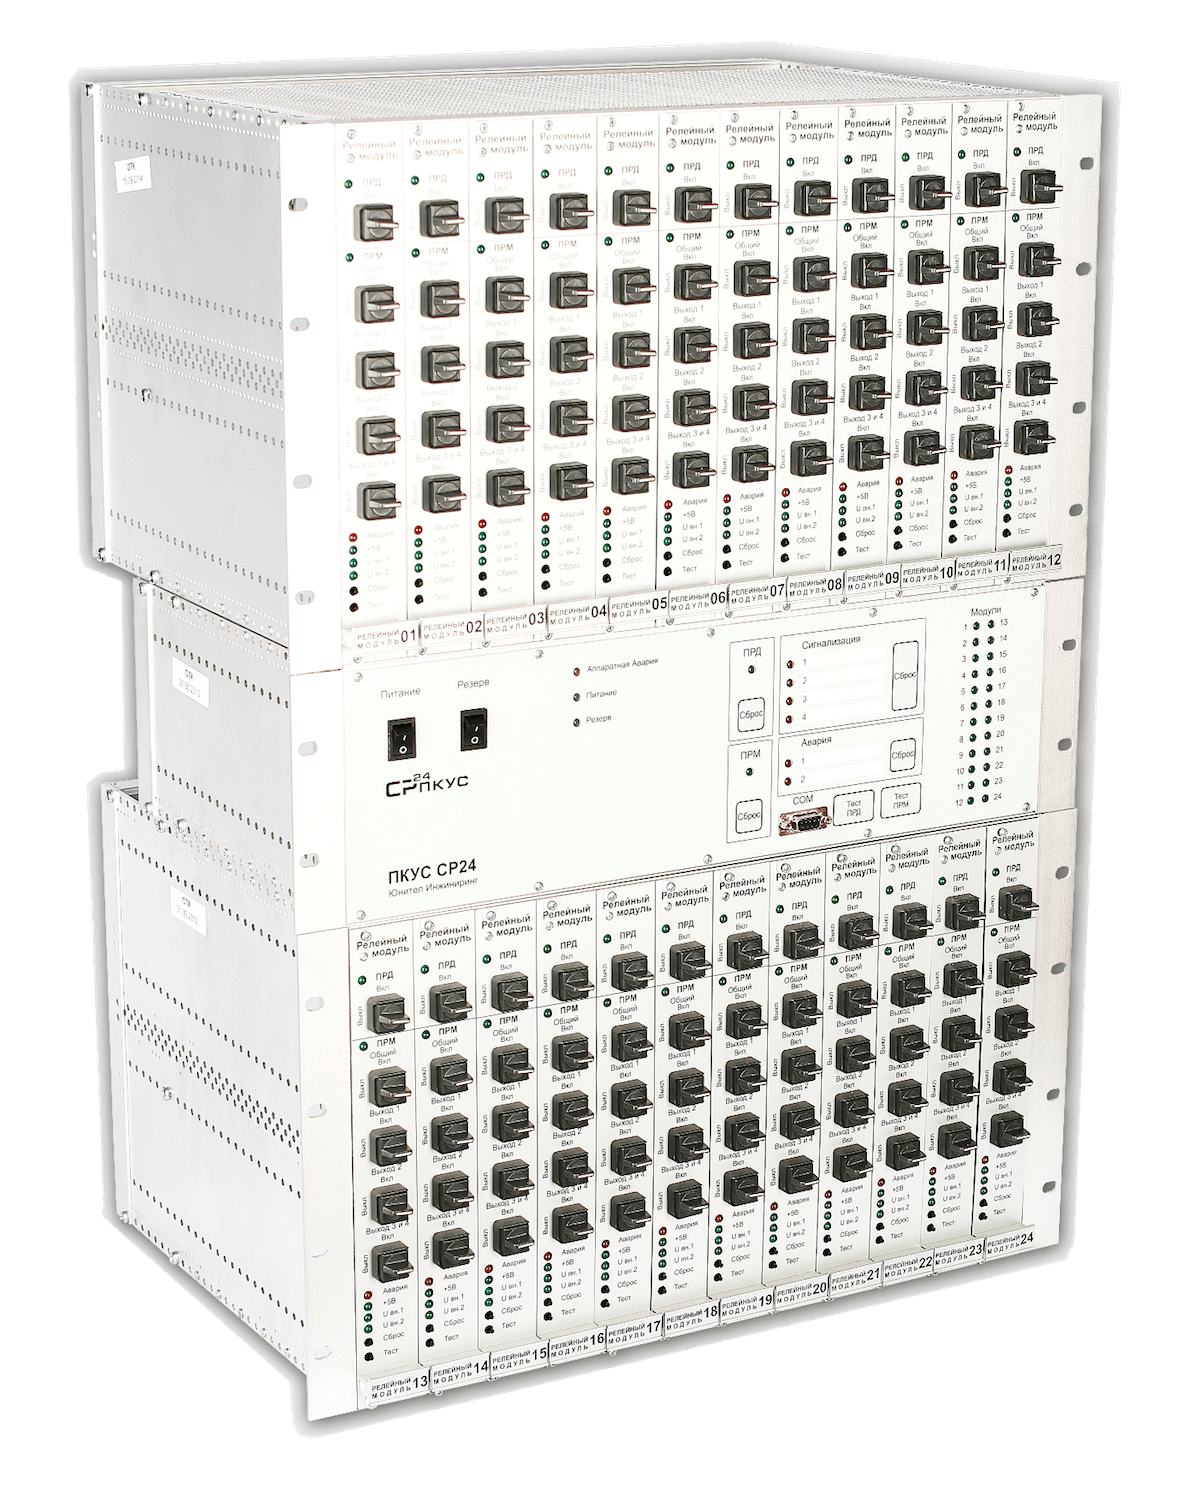 PKU SR24 Control and monitoring panel with event recorder